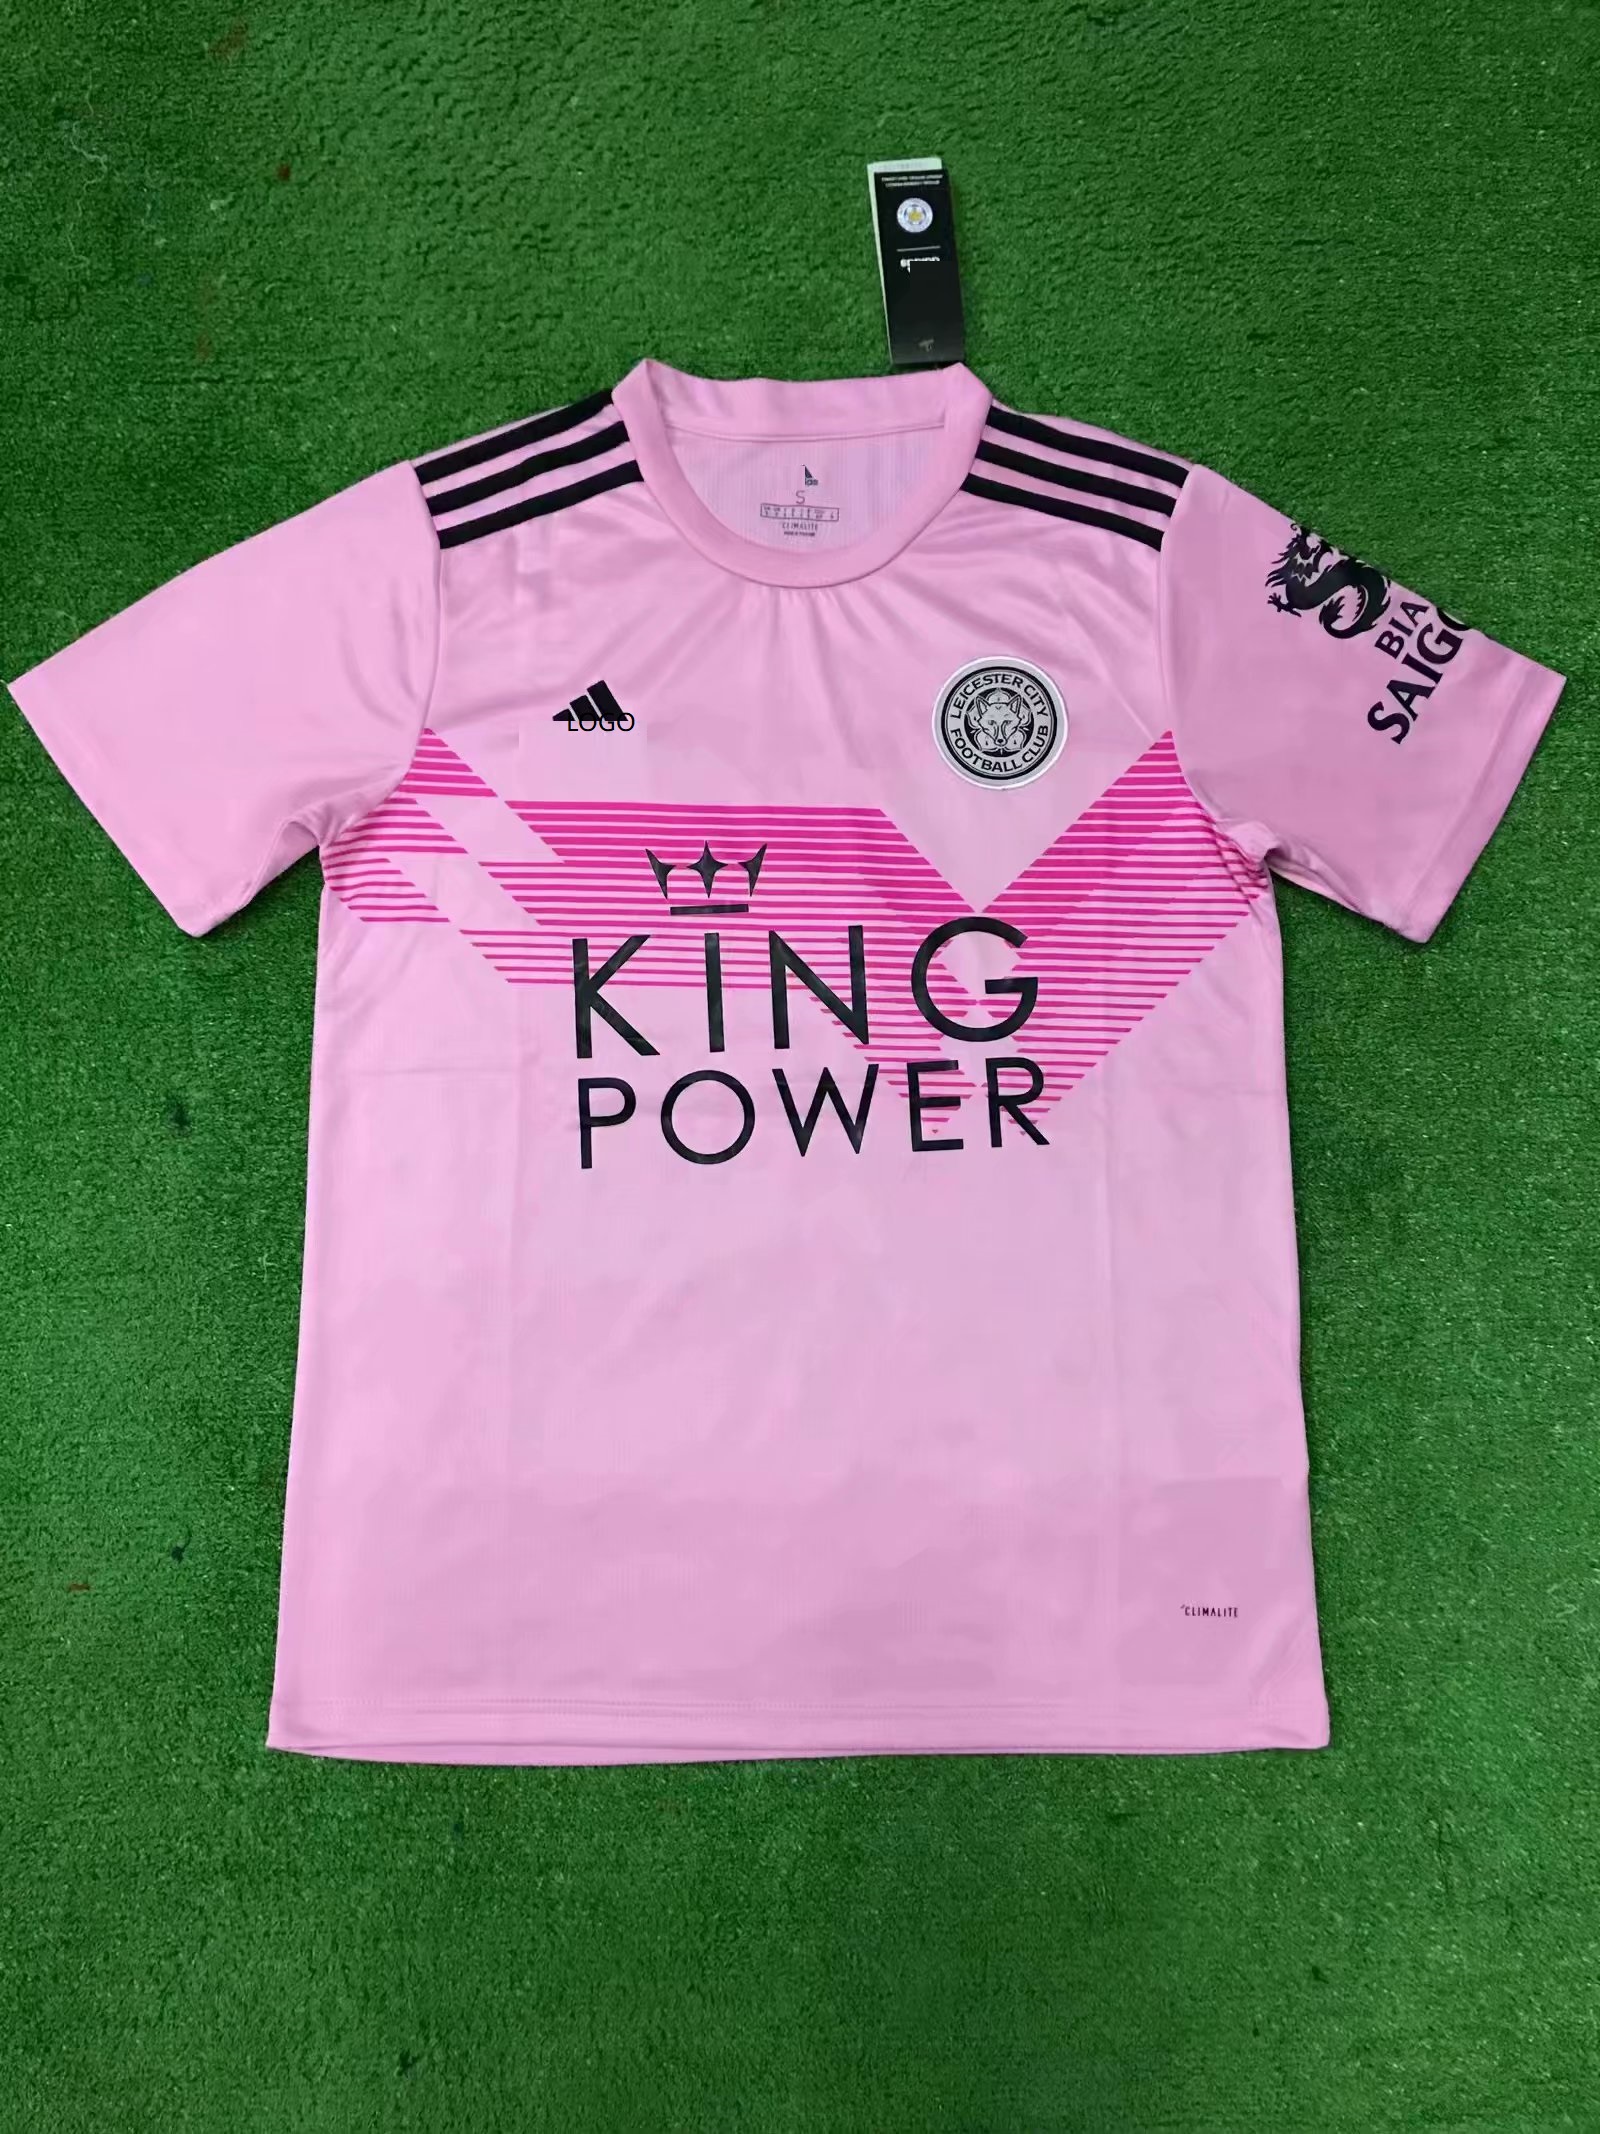 leicester city jersey pink